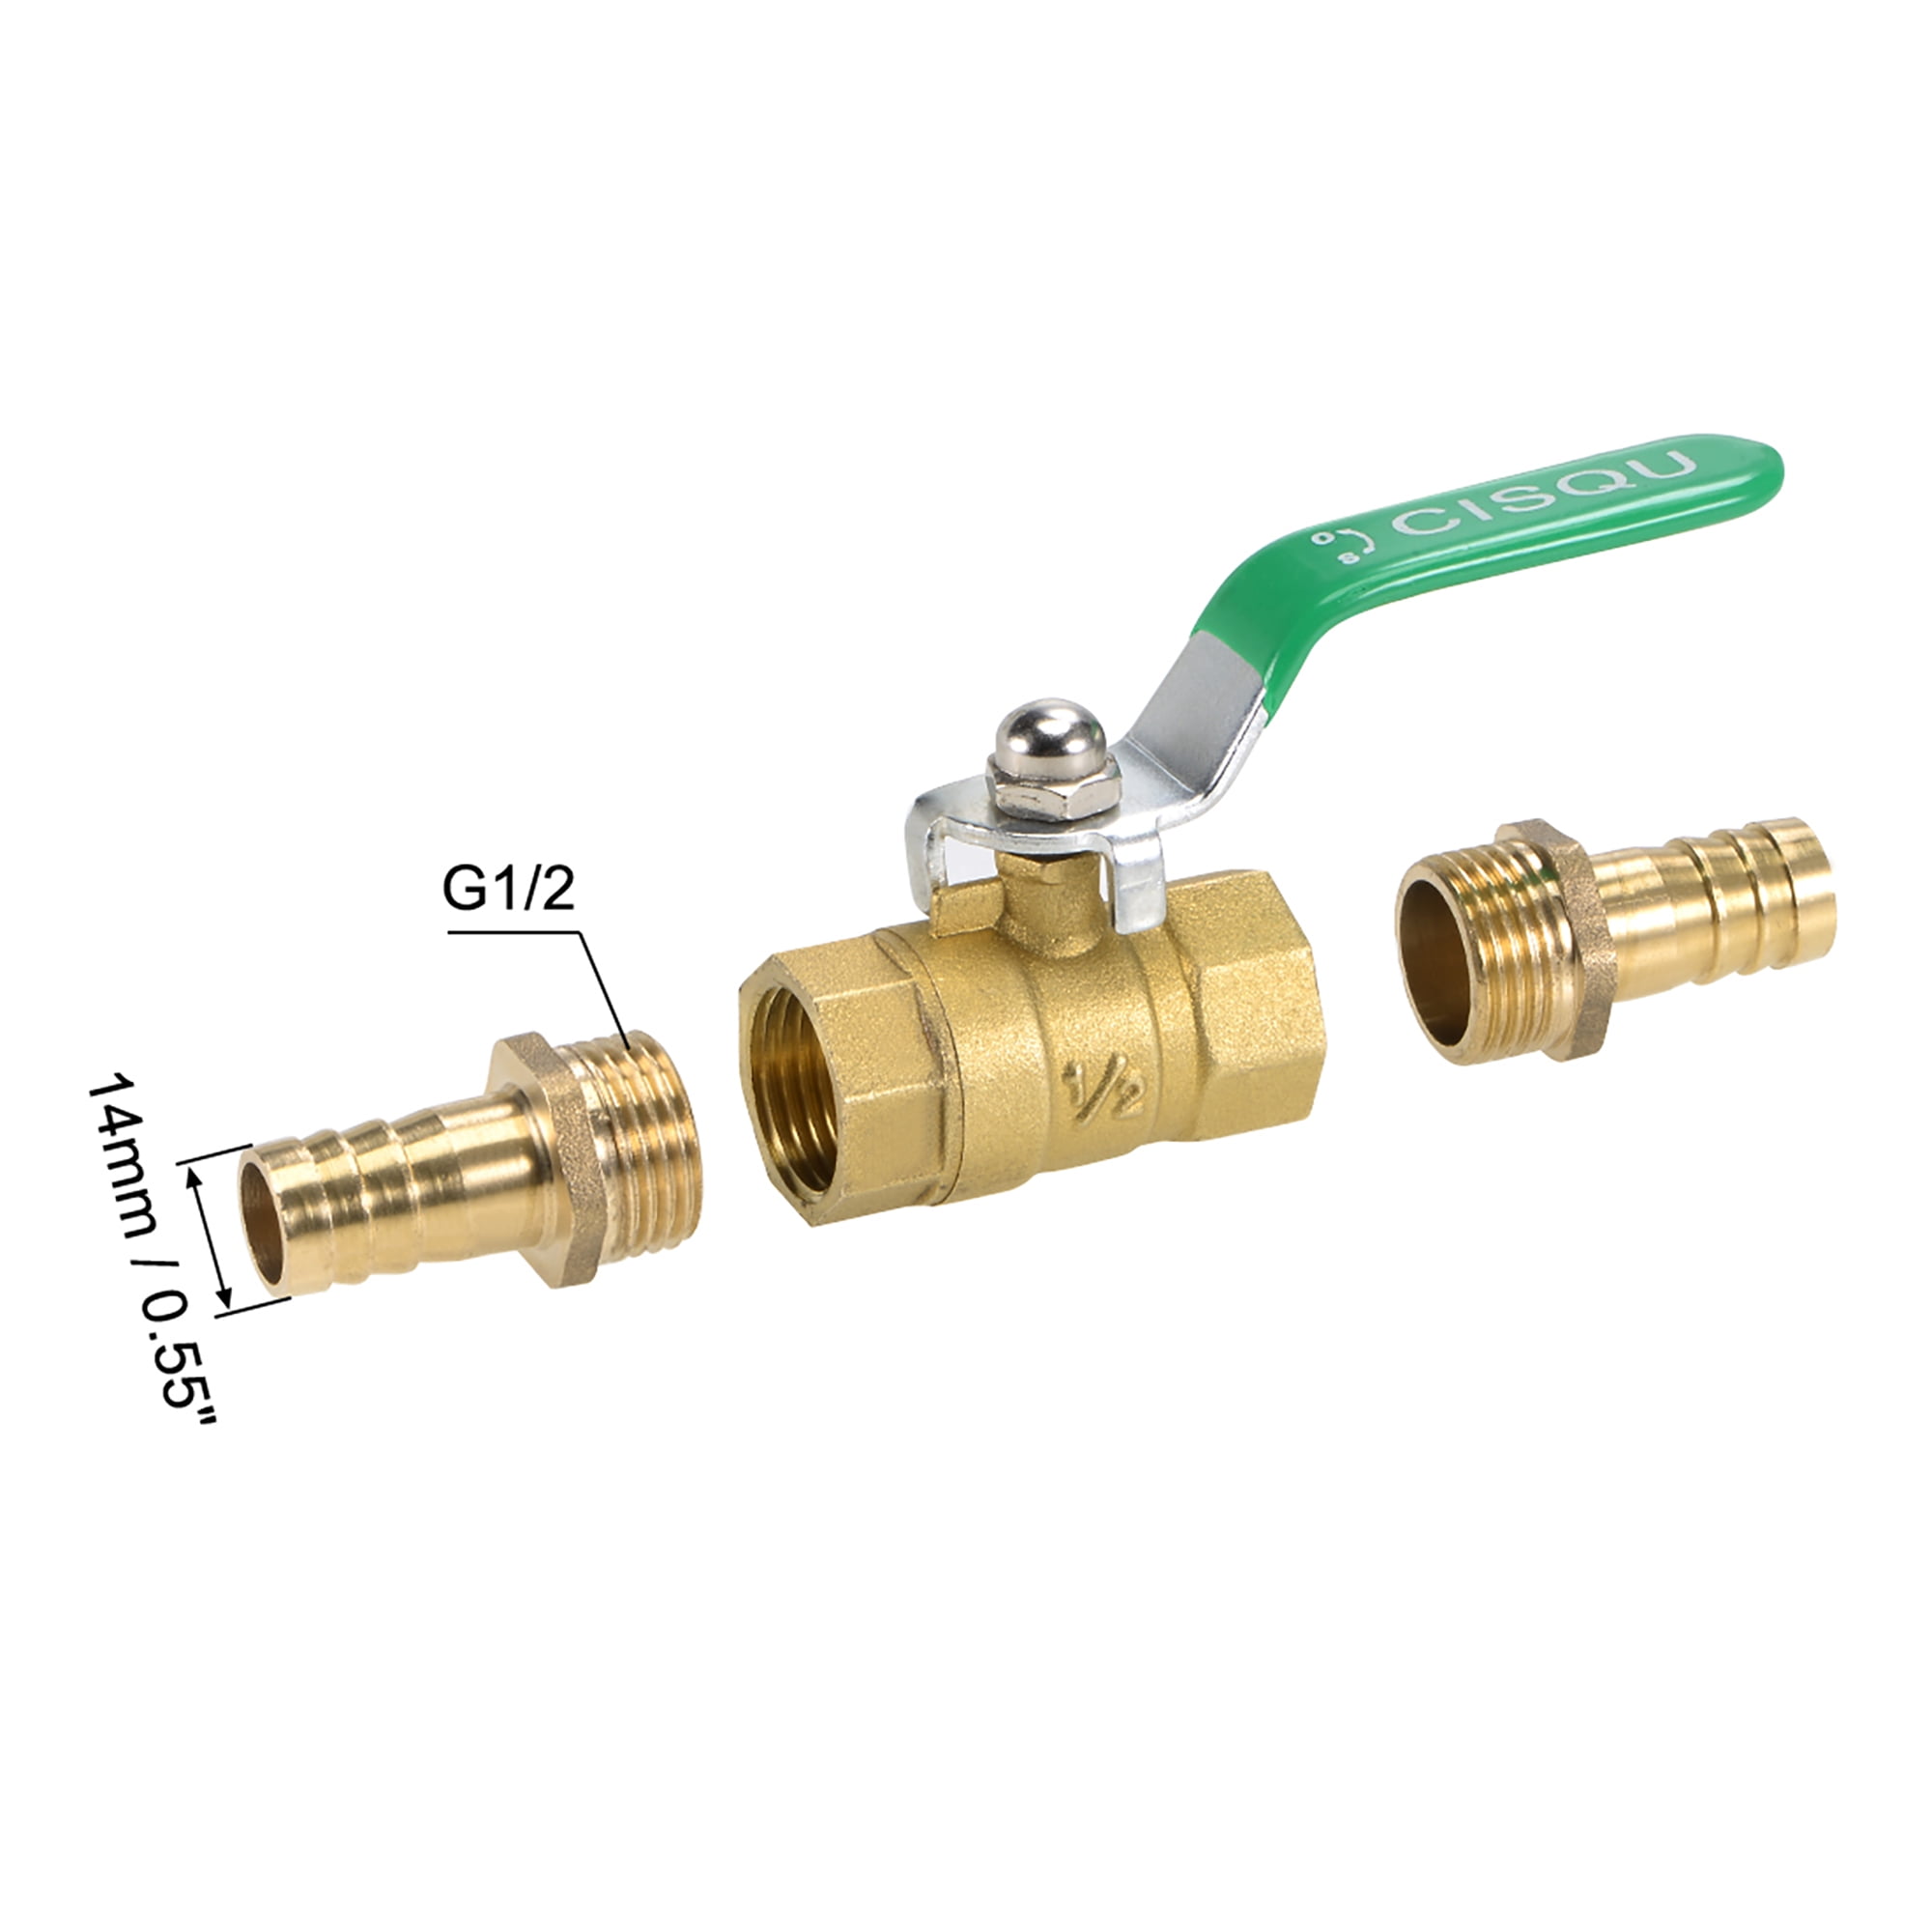 14mm Pipe ID hose Barb Brass Ball Valve Fitting Green Lever Handle Water Air L10 